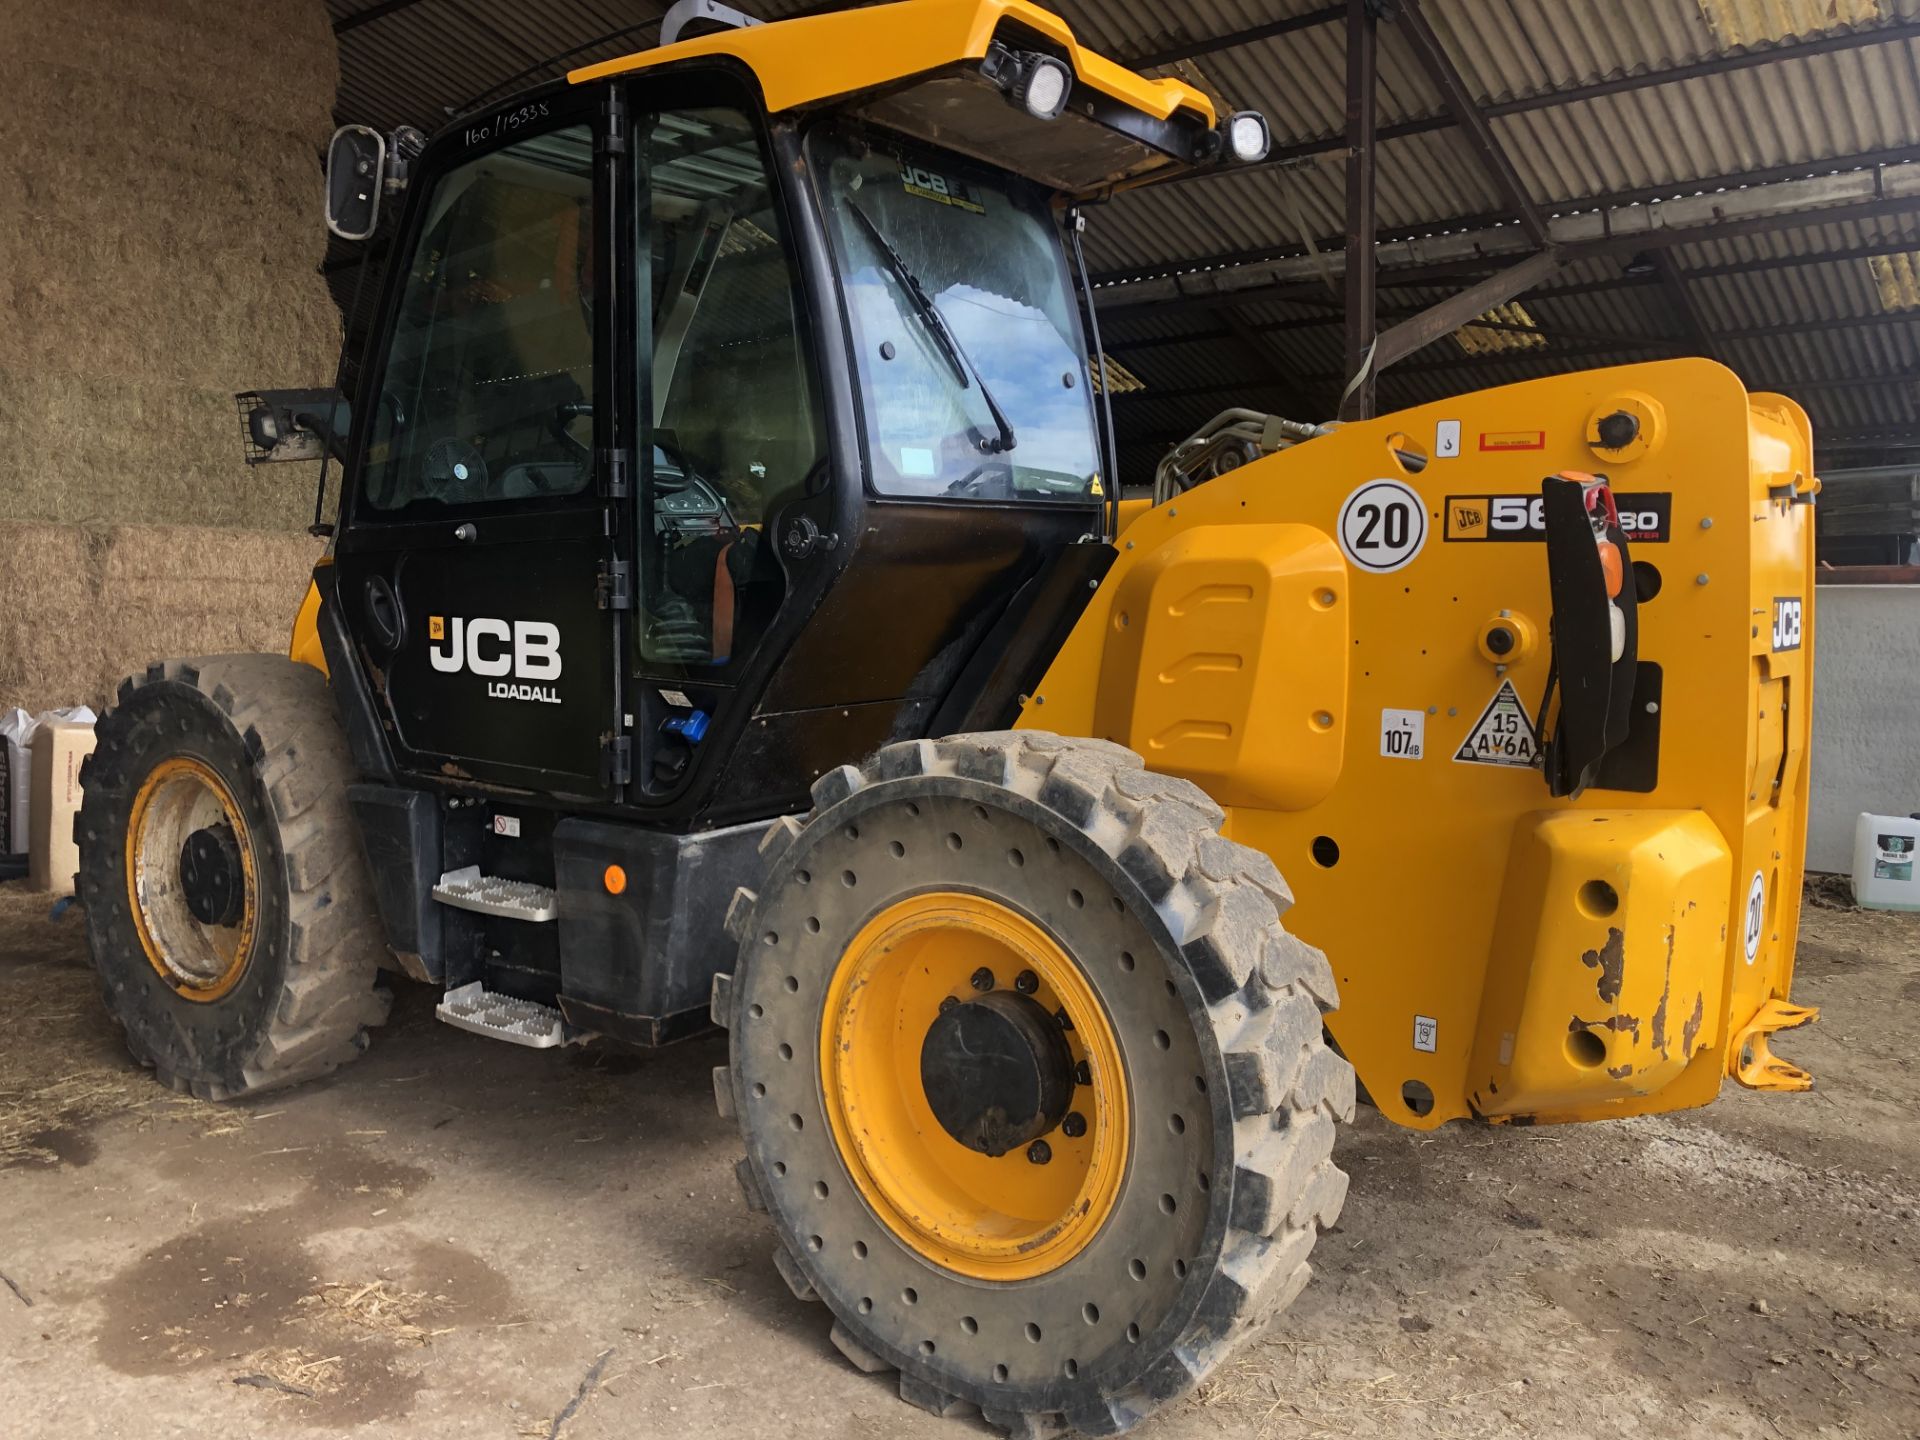 JCB 560-80 Wastemaster four wheel drive & steer Telescopic Handler c/w air conditioned cab, 13. - Image 3 of 4